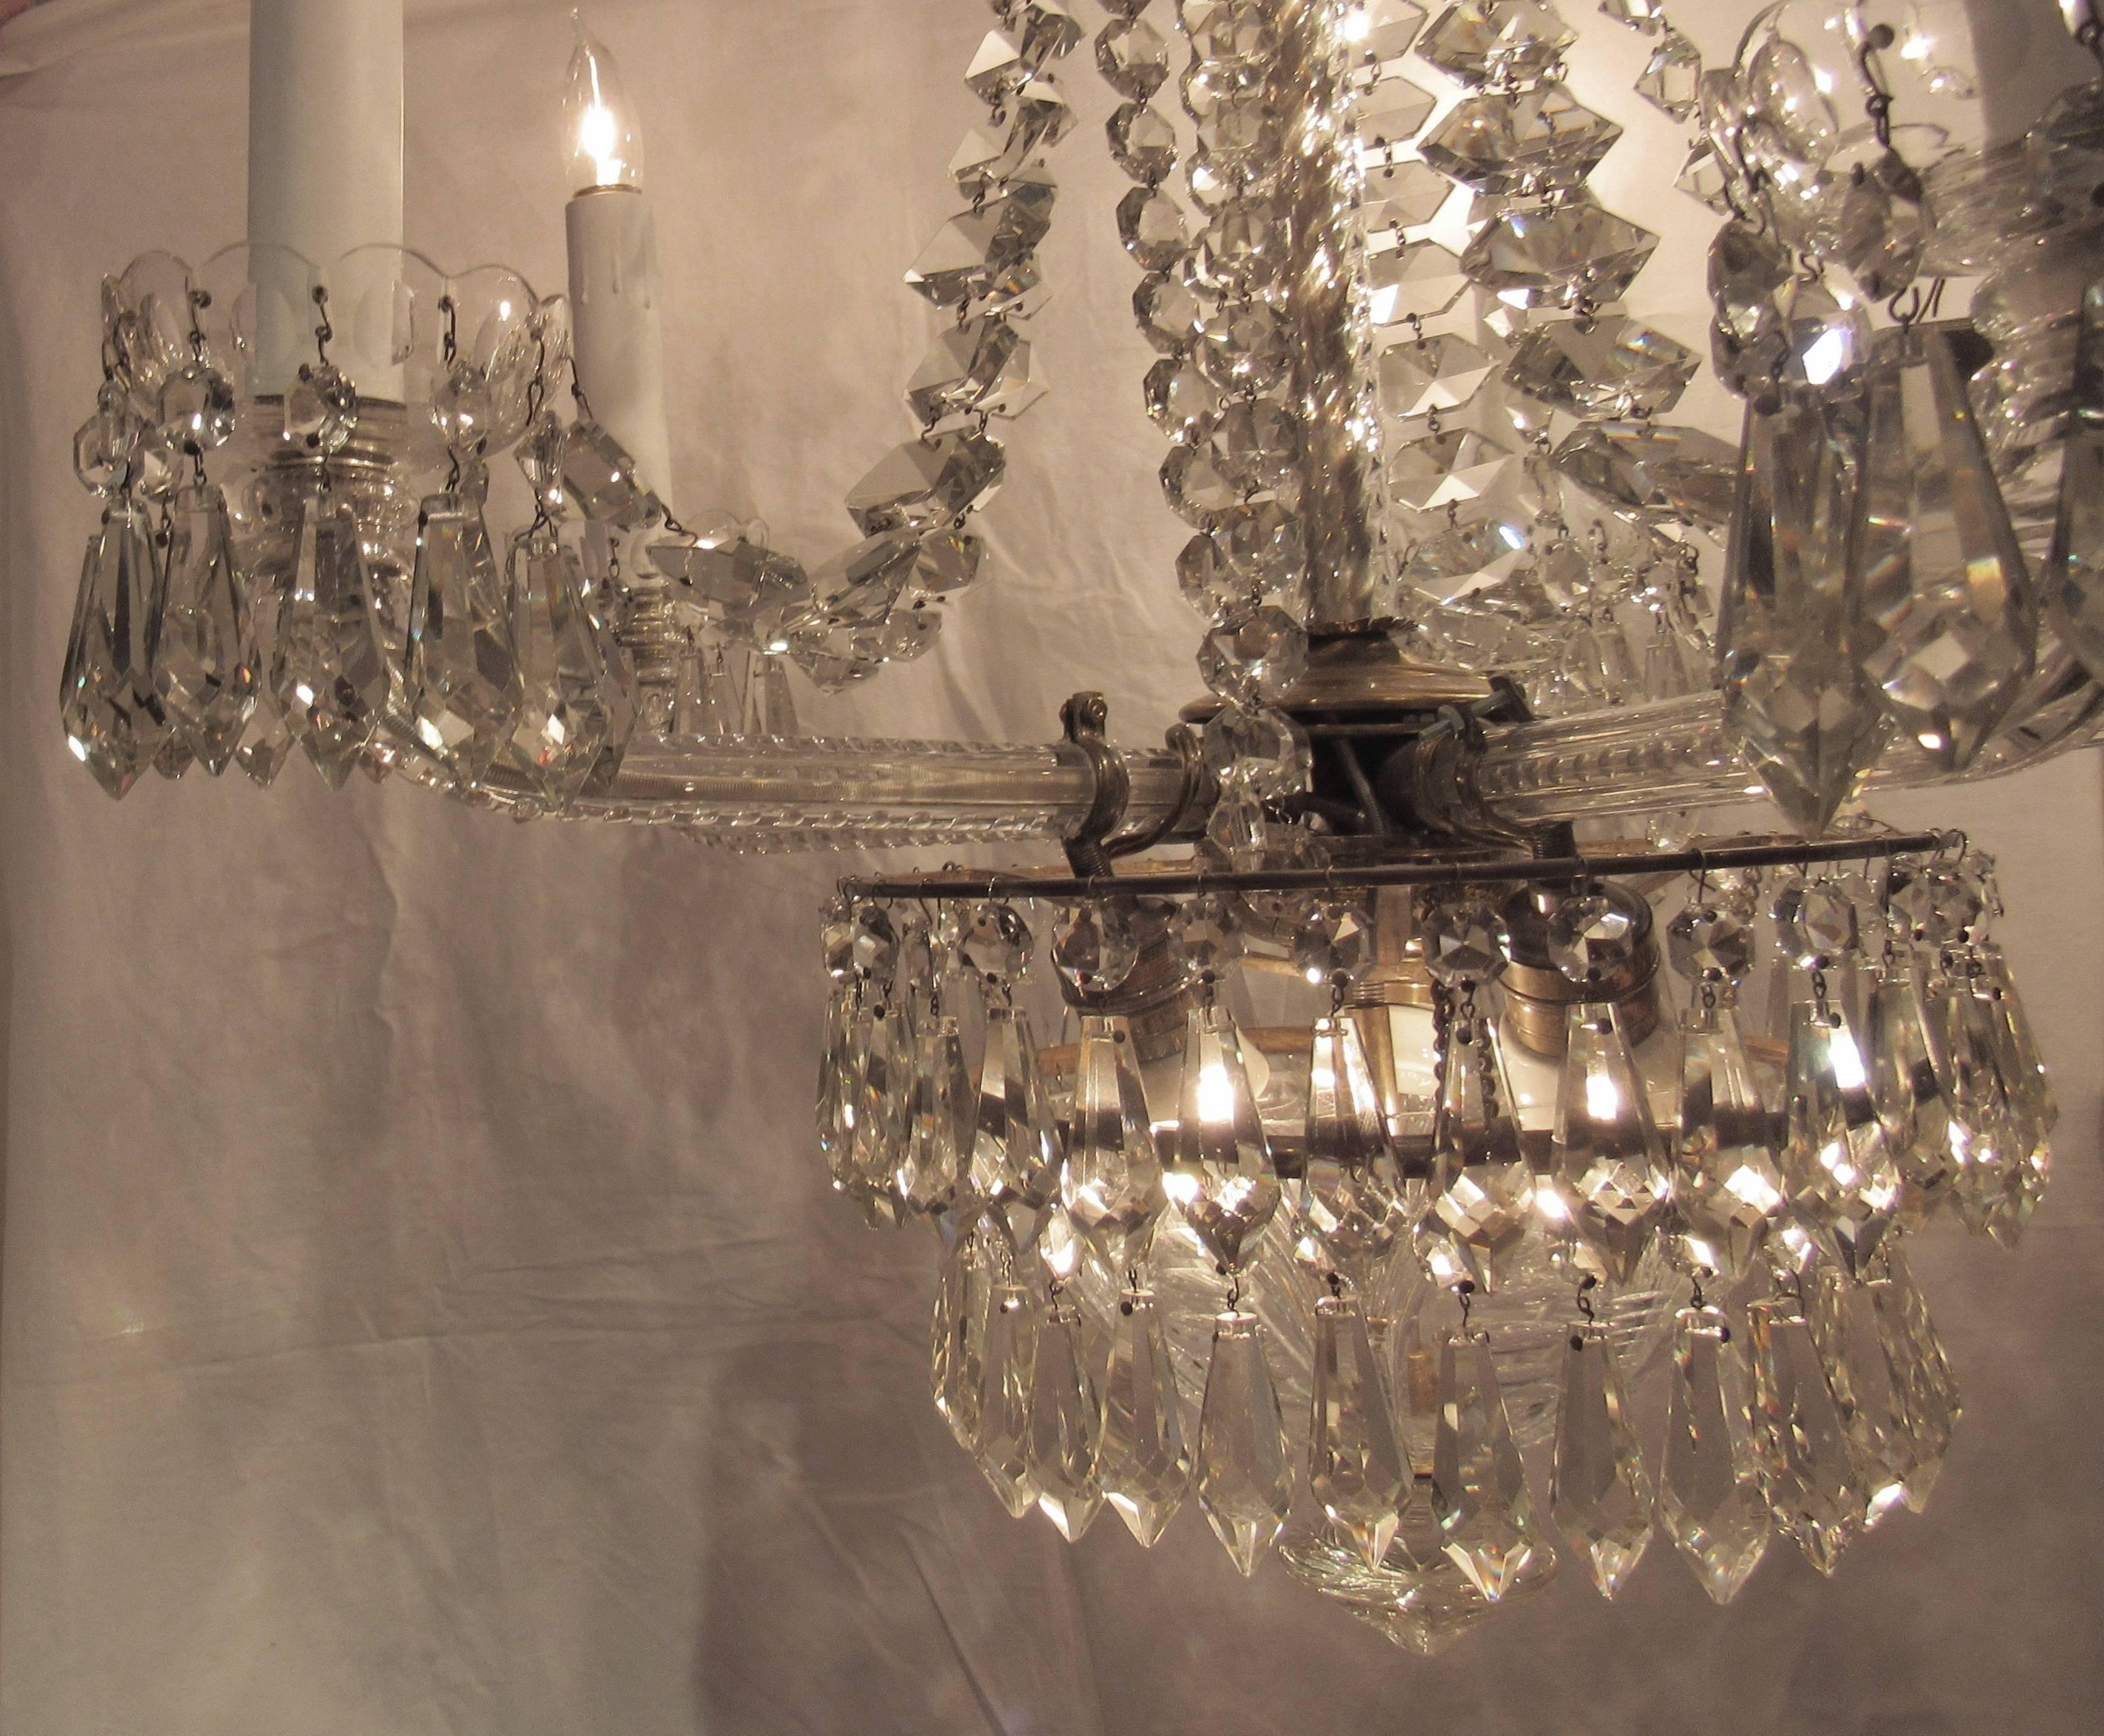 Beautiful large crystal chandelier, early 20th century.

Five arms with cut glass rods. Glass dome in center with three lights surrounded by two graduating rows of prisms. Total of eight lights. Glass rod covers the central post with unusually